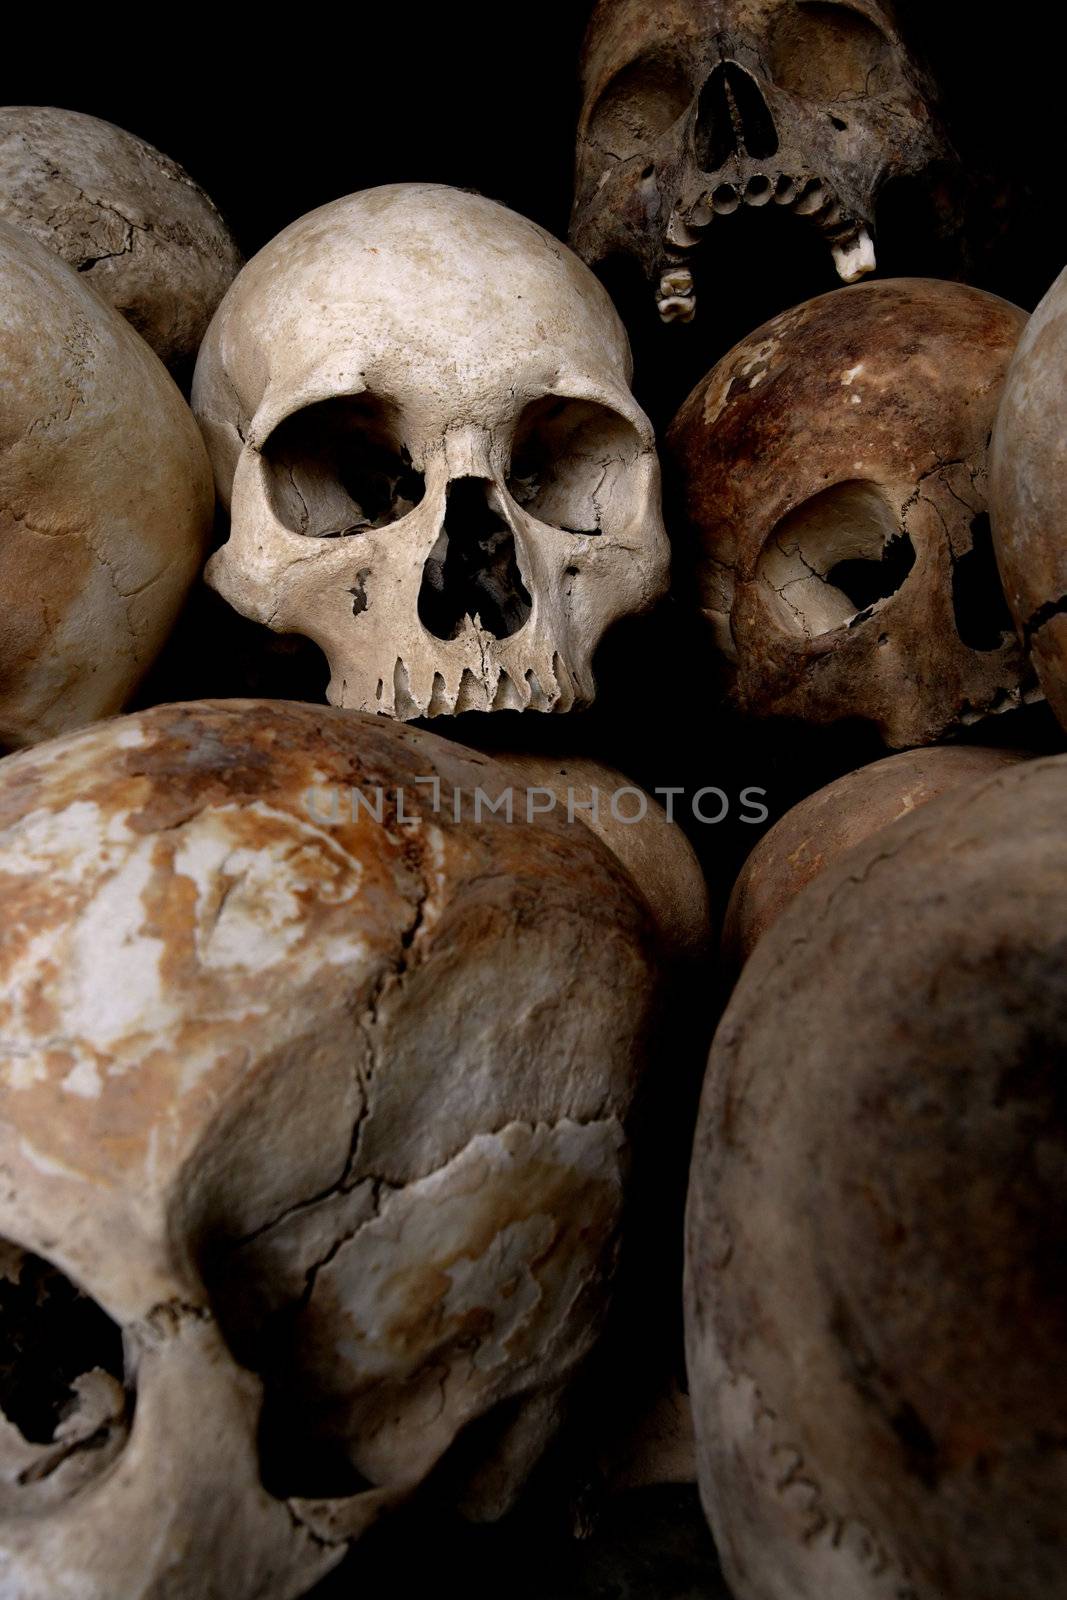 A pile of skulls from the Killing Fields in Phnom Penh, Cambodia.
